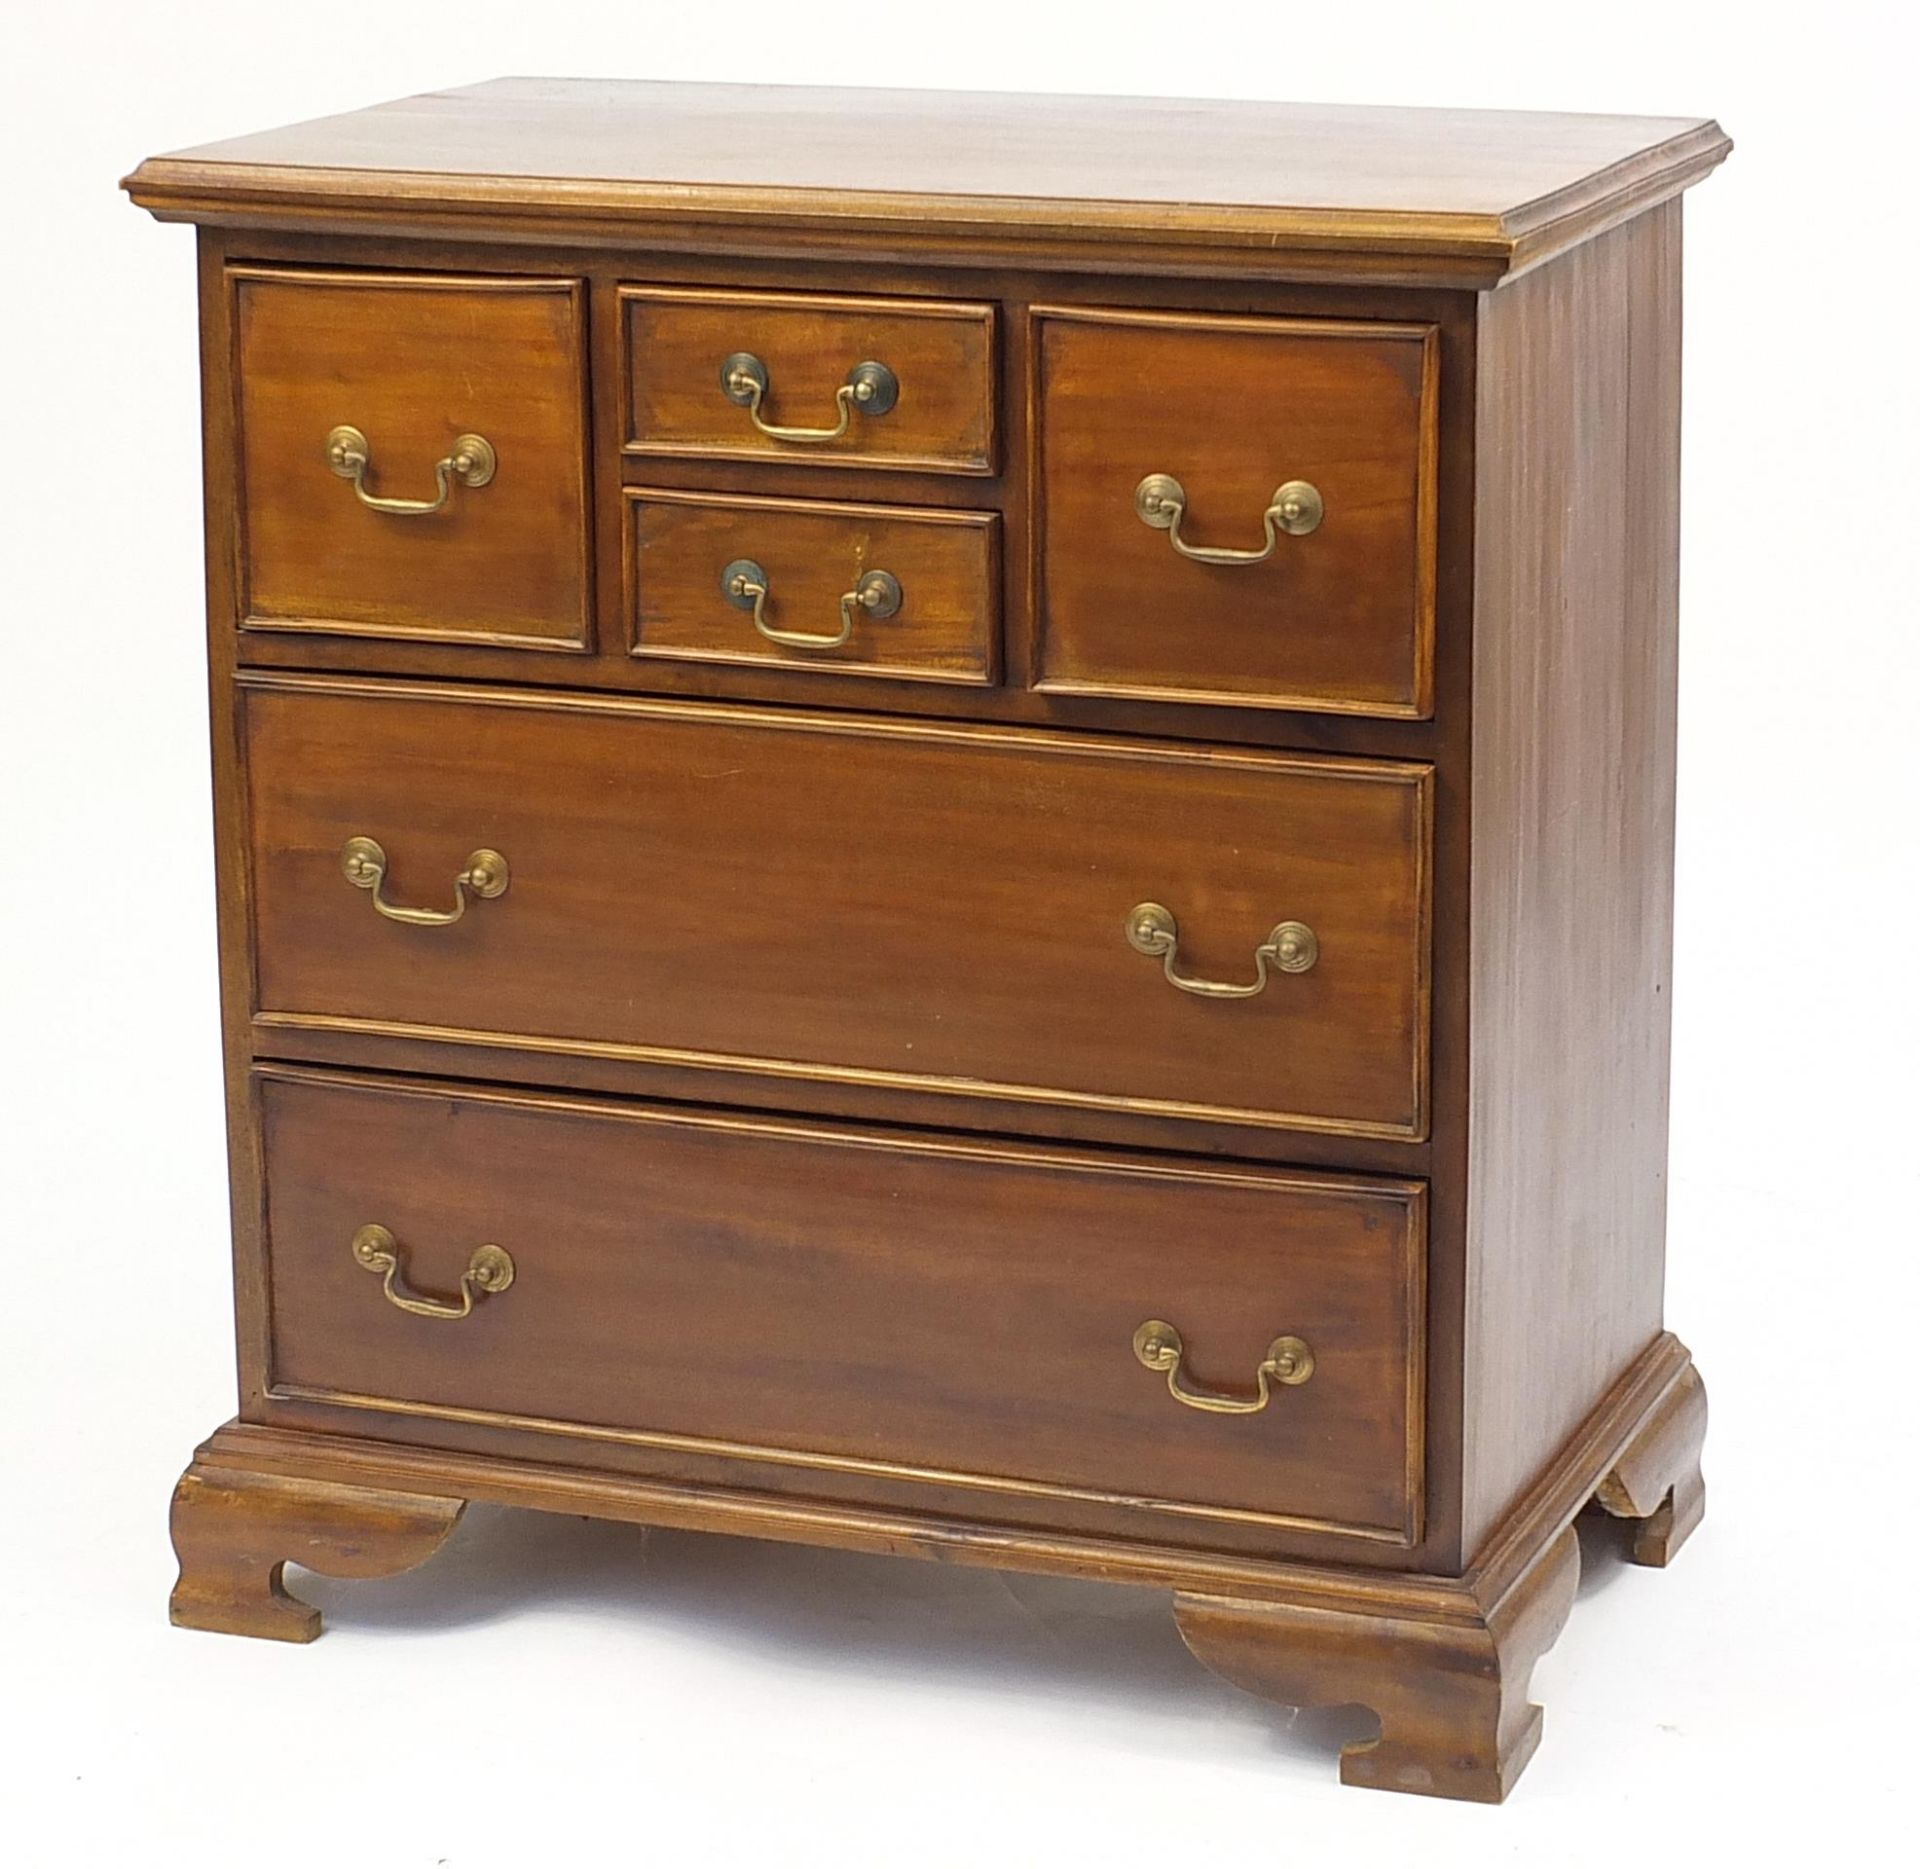 Mahogany five drawer chest with brass handles, 87cm H x 81cm W x 46cm D